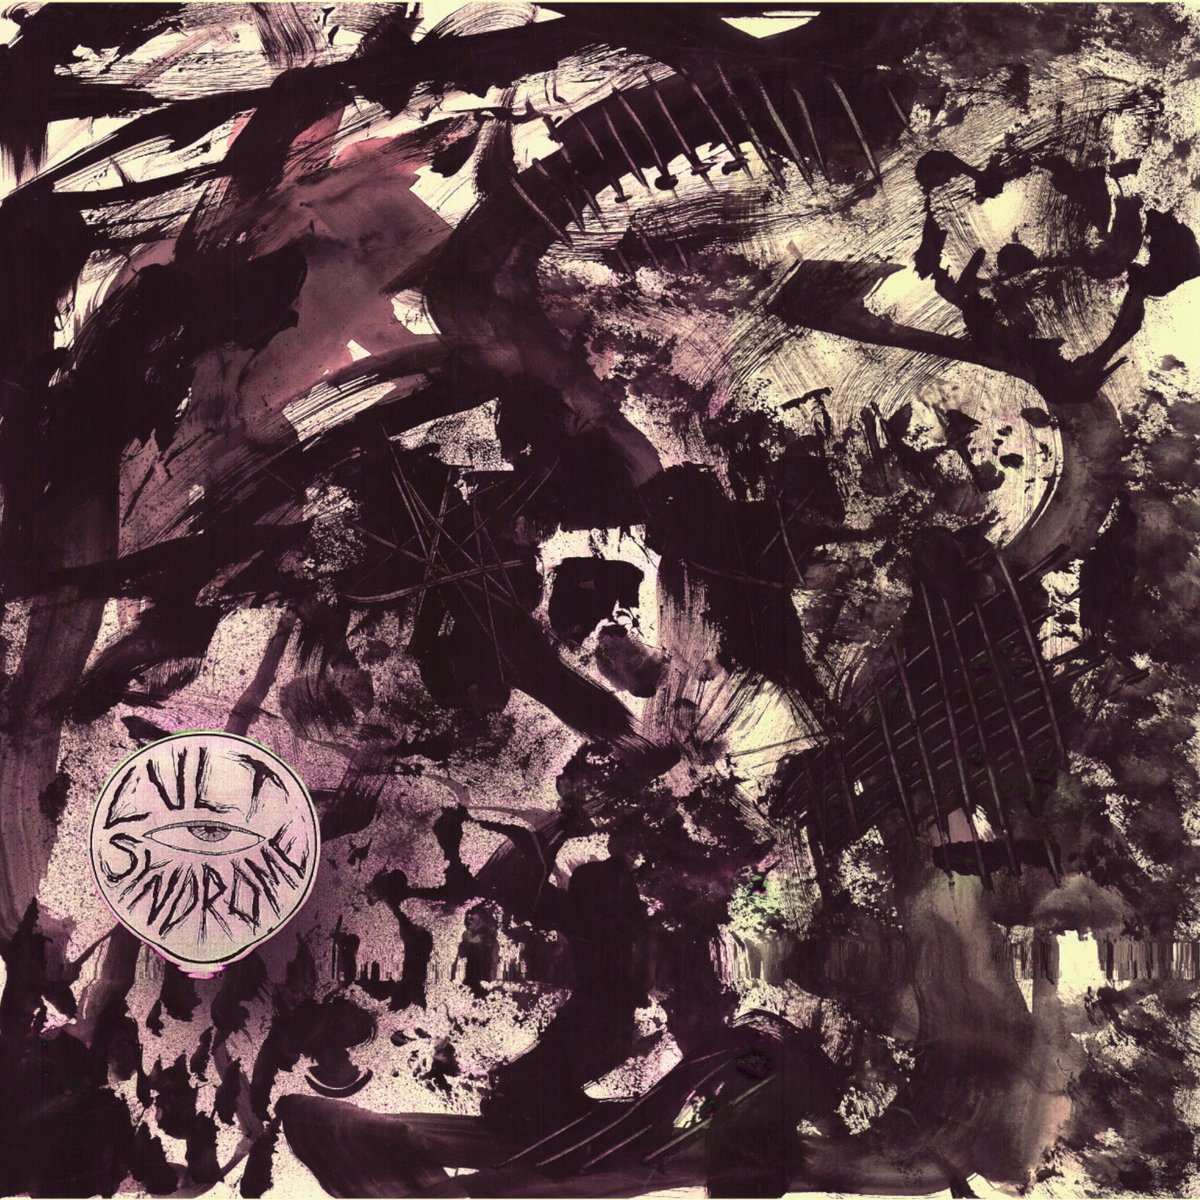 Image of  CULT SYNDROME "Winter" 12"